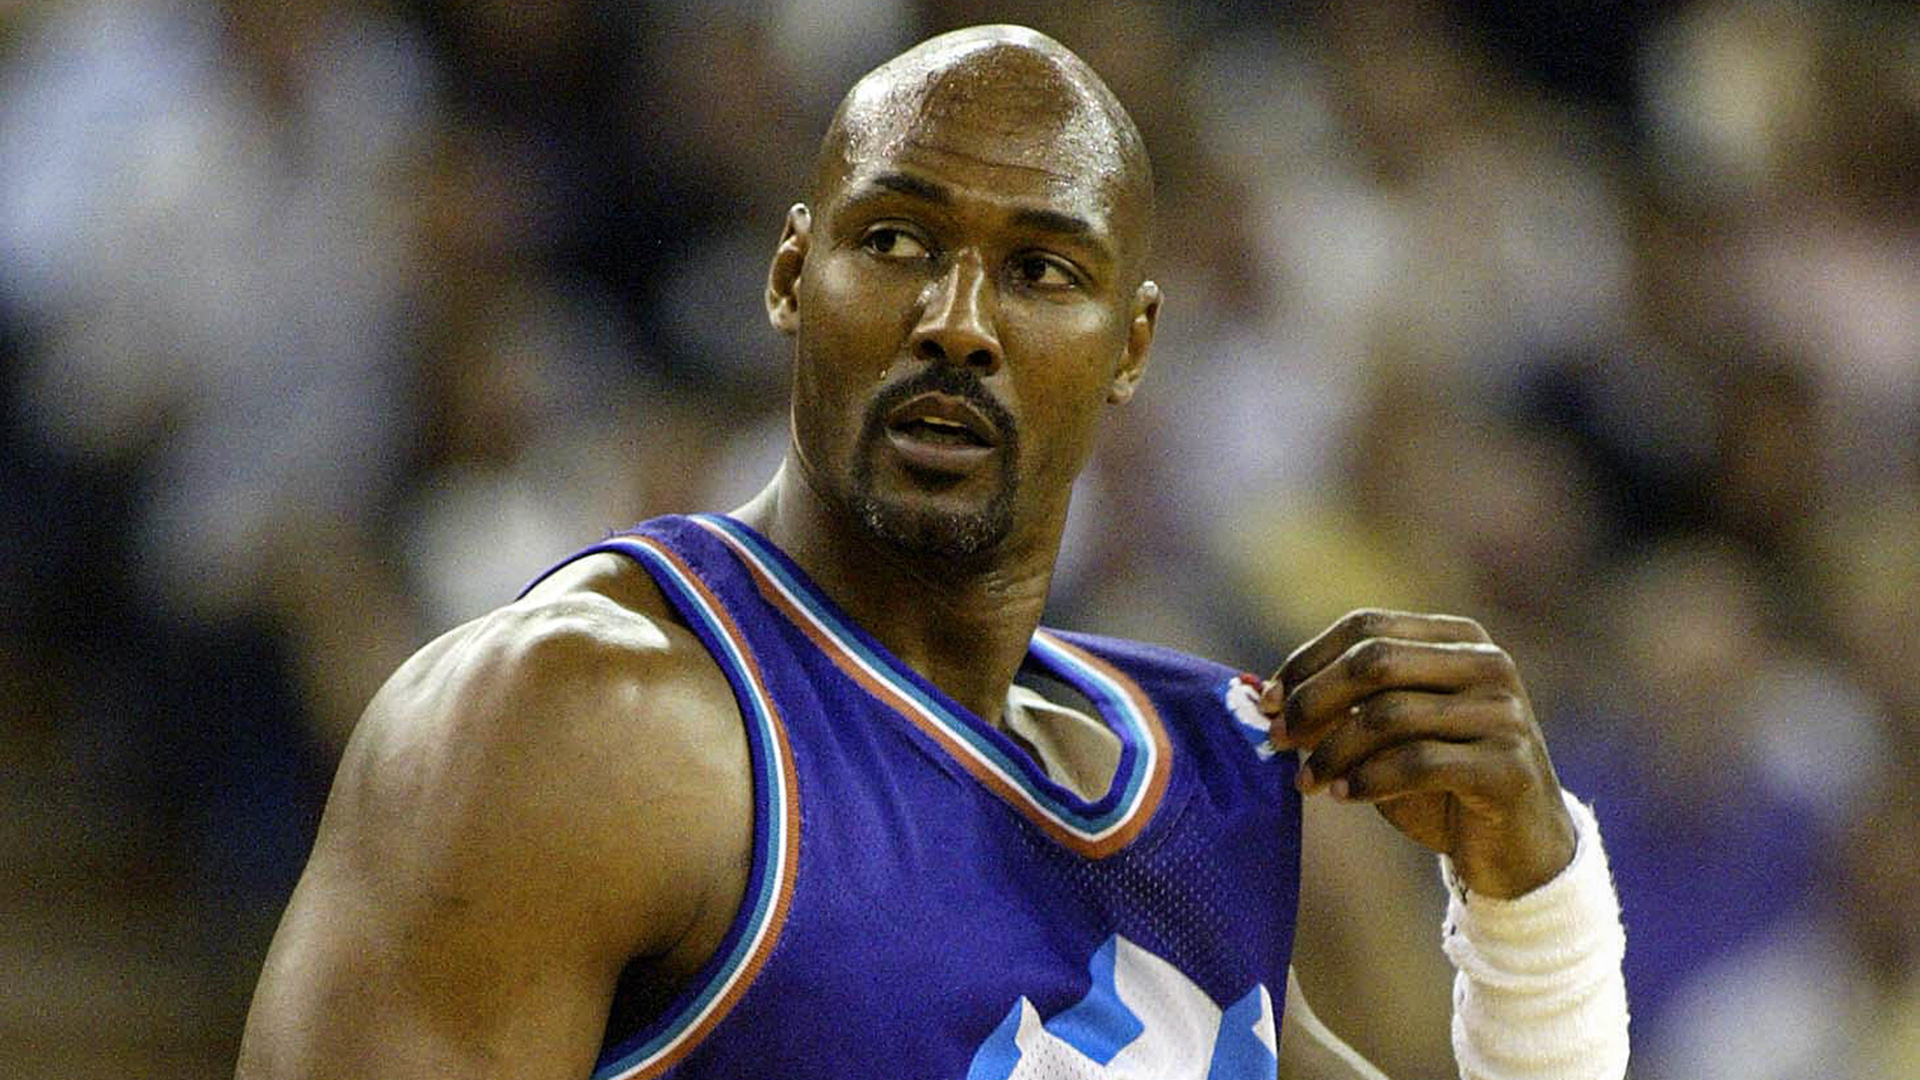 celebrities who committed crimes - Karl Malone impregnated a 13 year old at the age of 20.